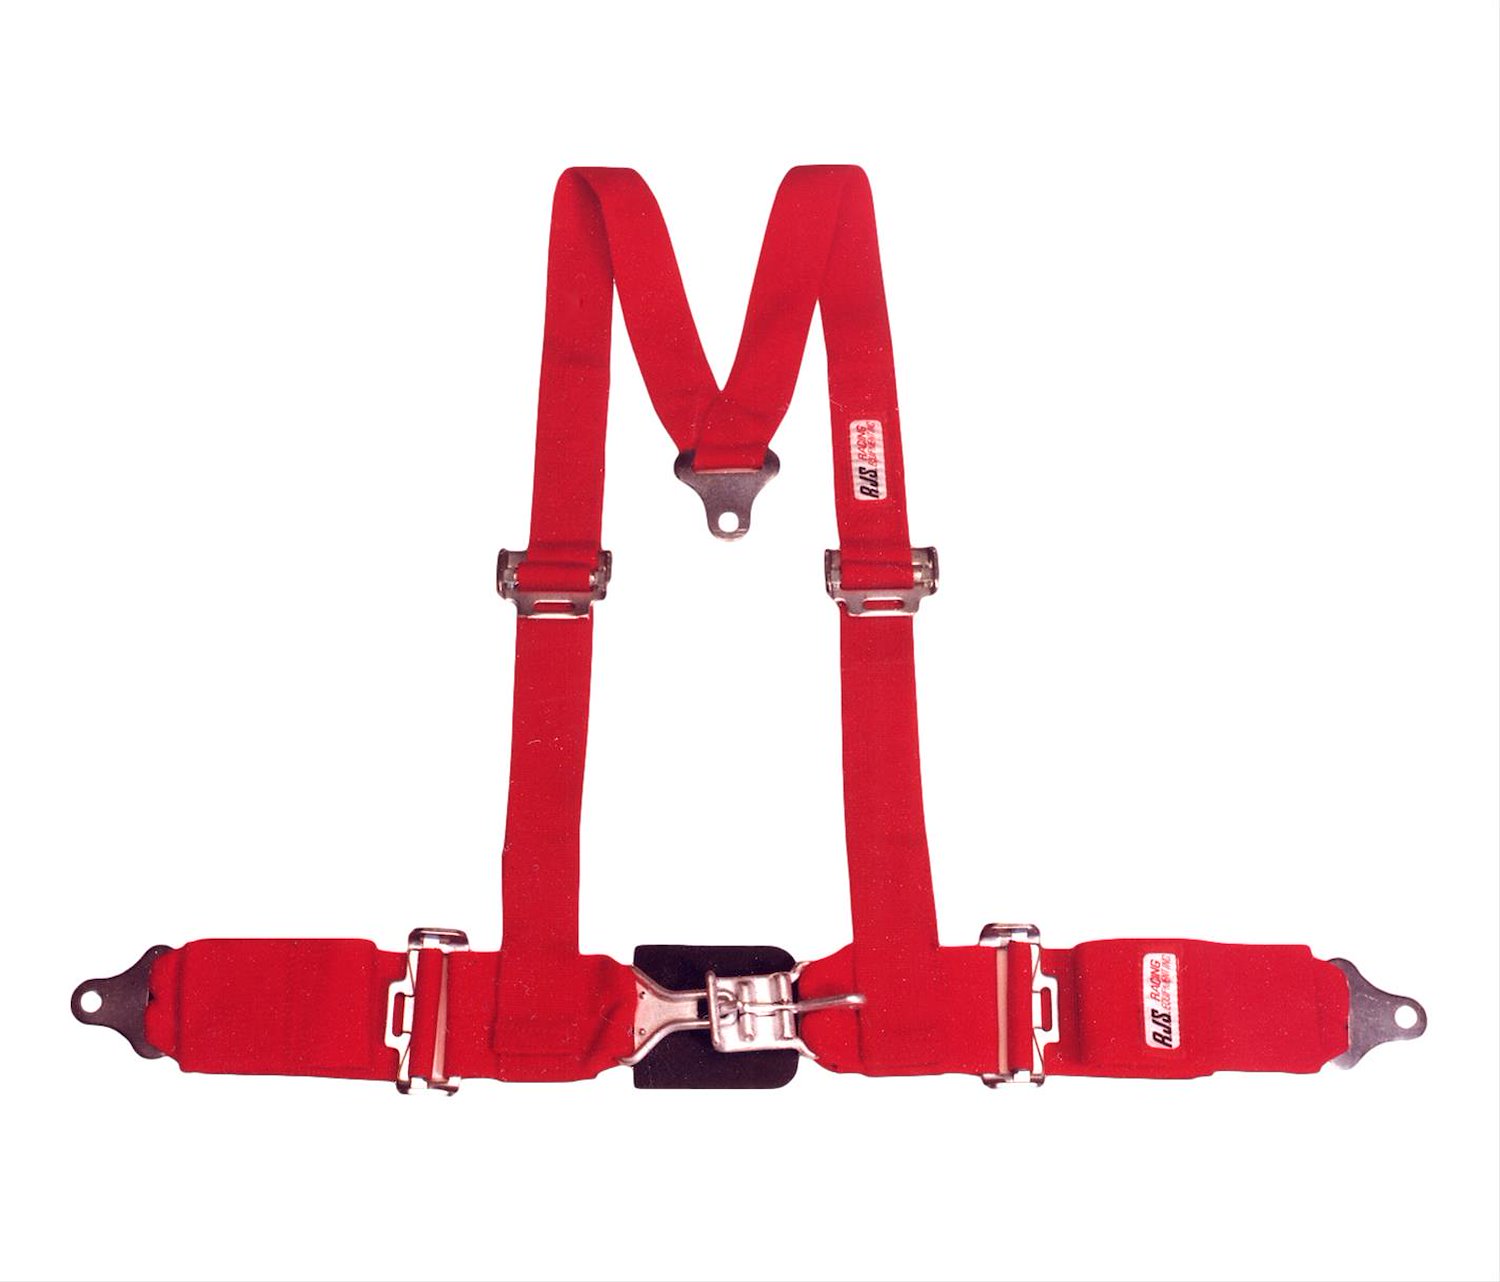 NON-SFI L&L HARNESS 3 PULL DOWN Lap Belt SEWN IN 2 Shoulder Harness V ROLL BAR Mount ALL BOLT ENDS RED